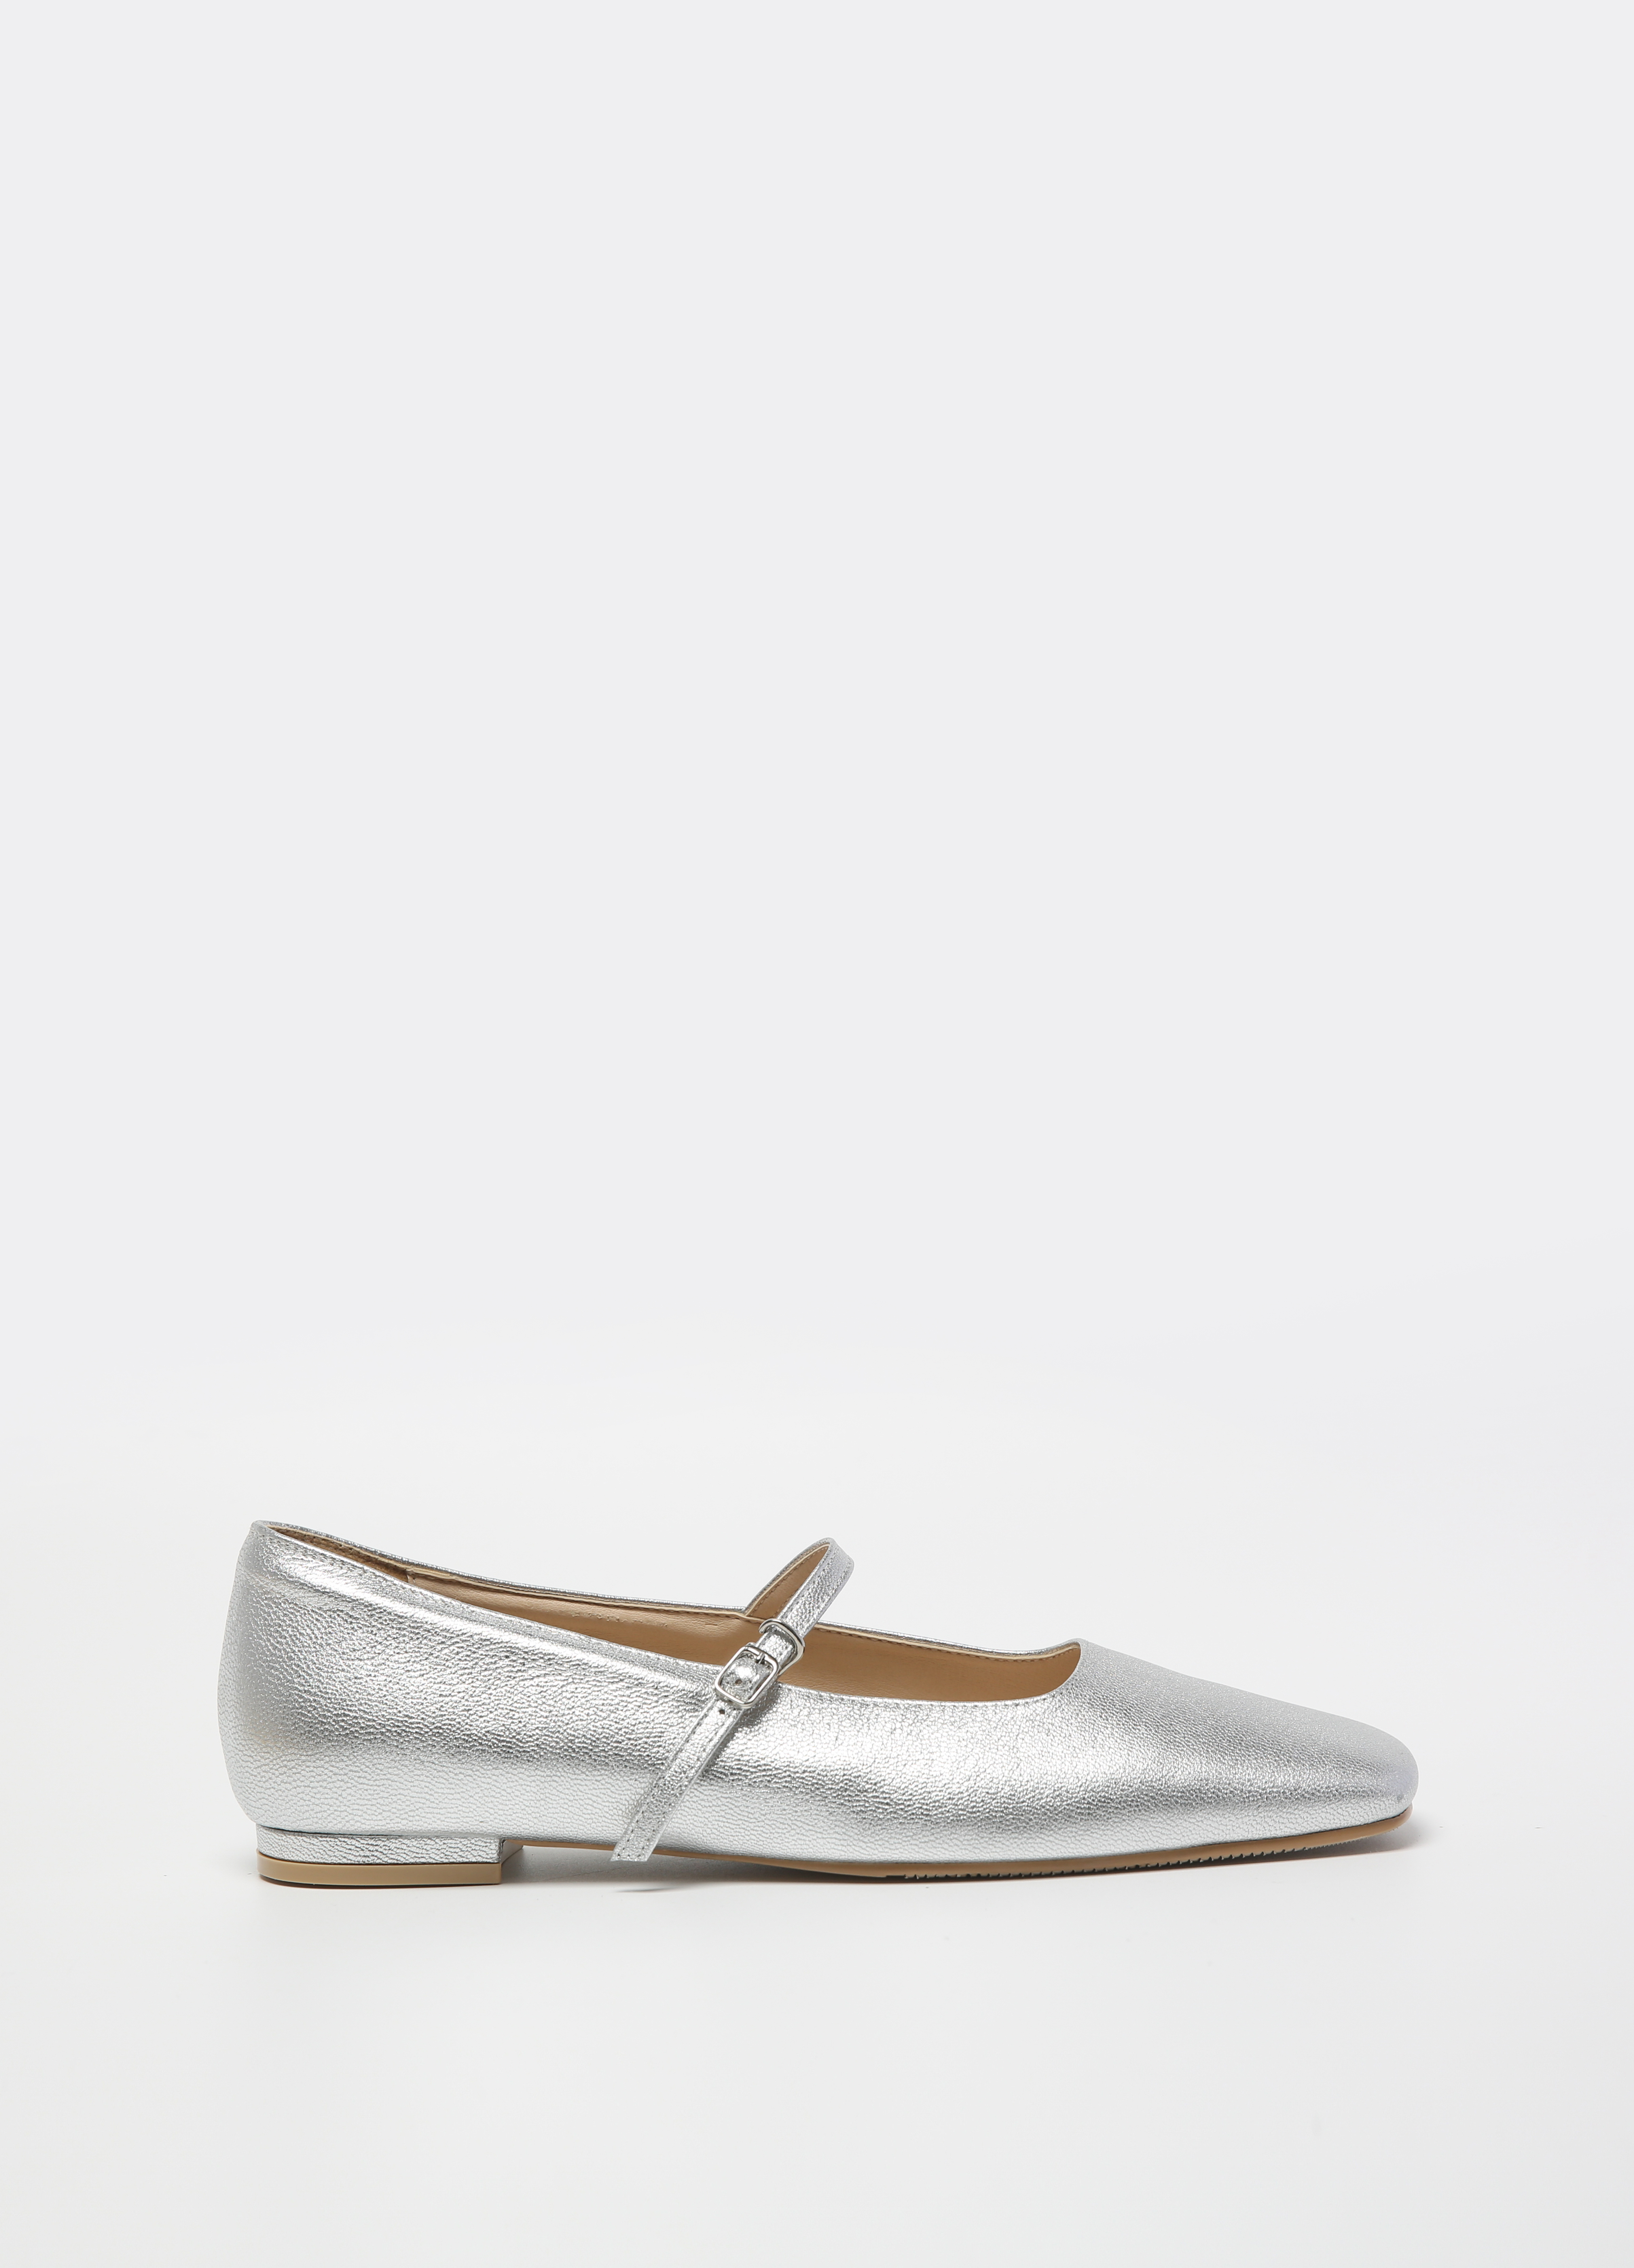 SQUARE MARY JANE FLAT (SILVER)